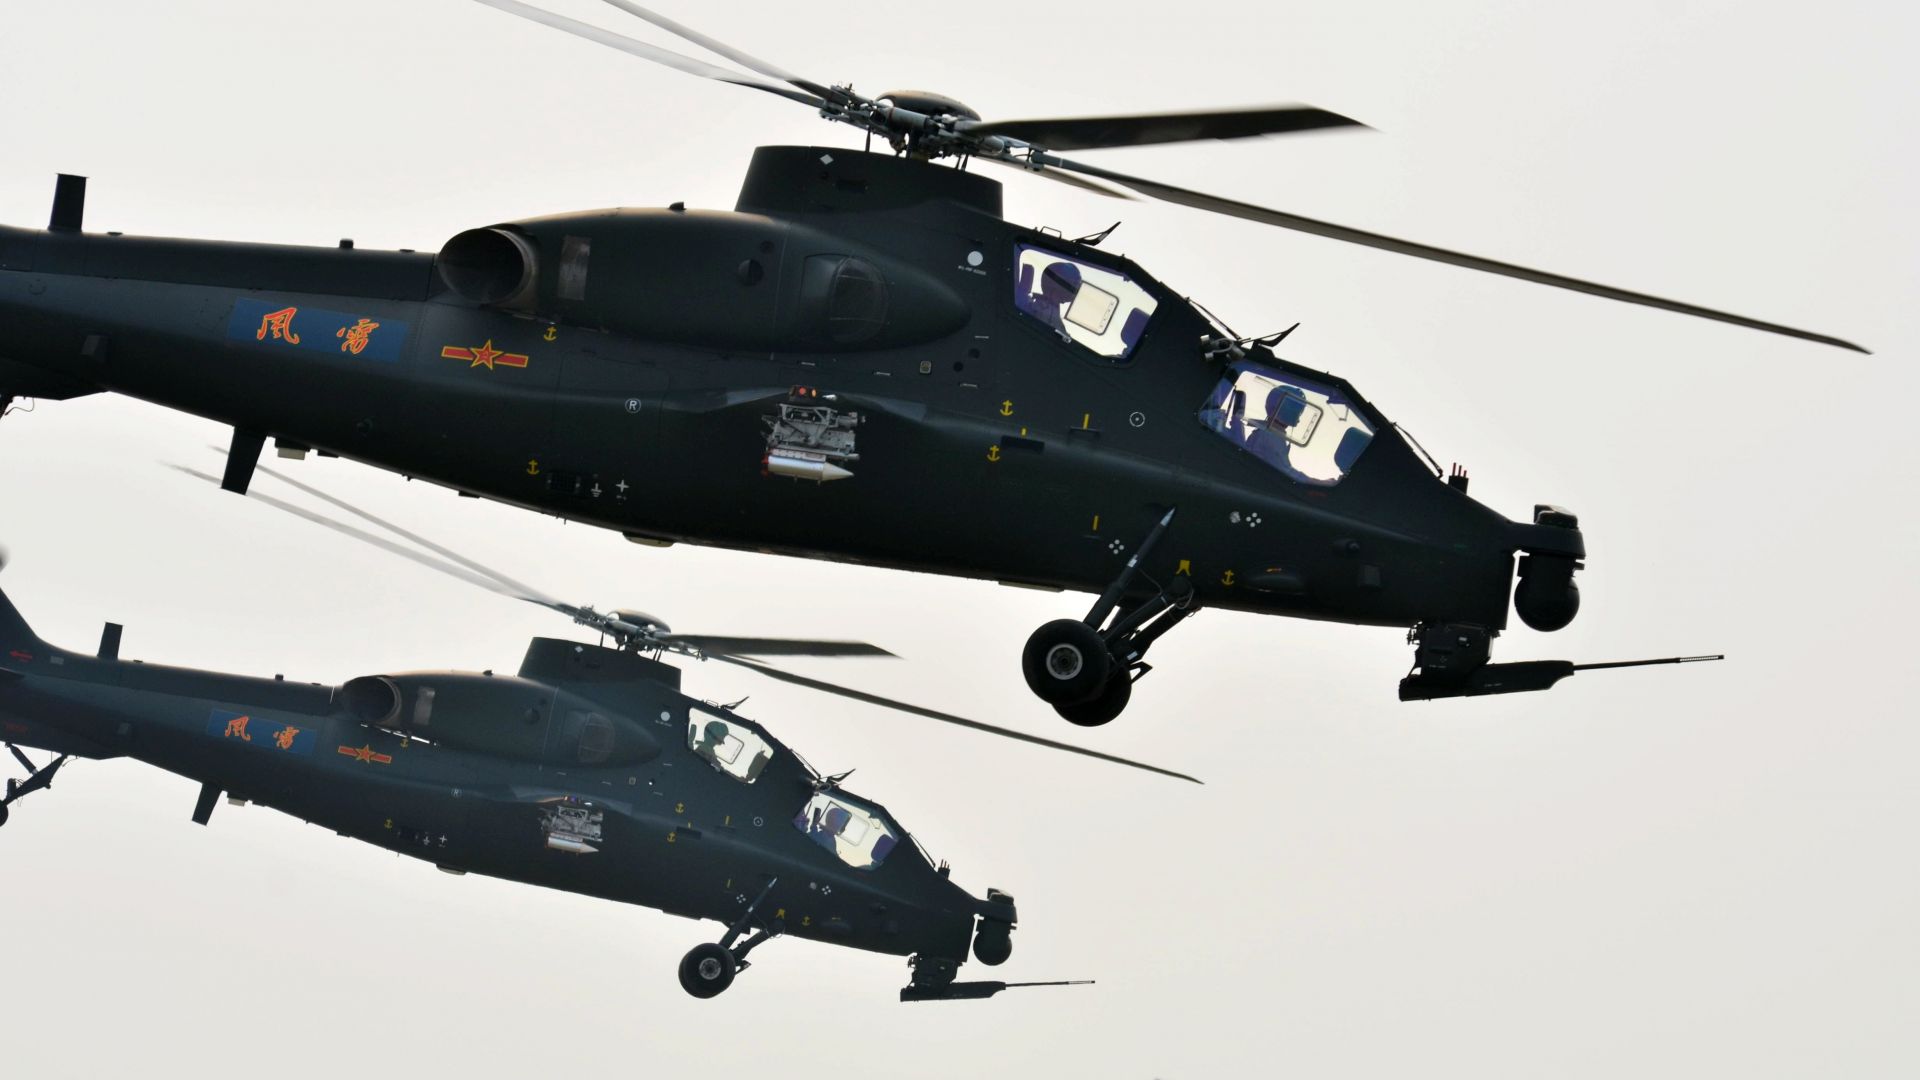 CAIC Z-10, attack helicopter, China Air Force (horizontal)